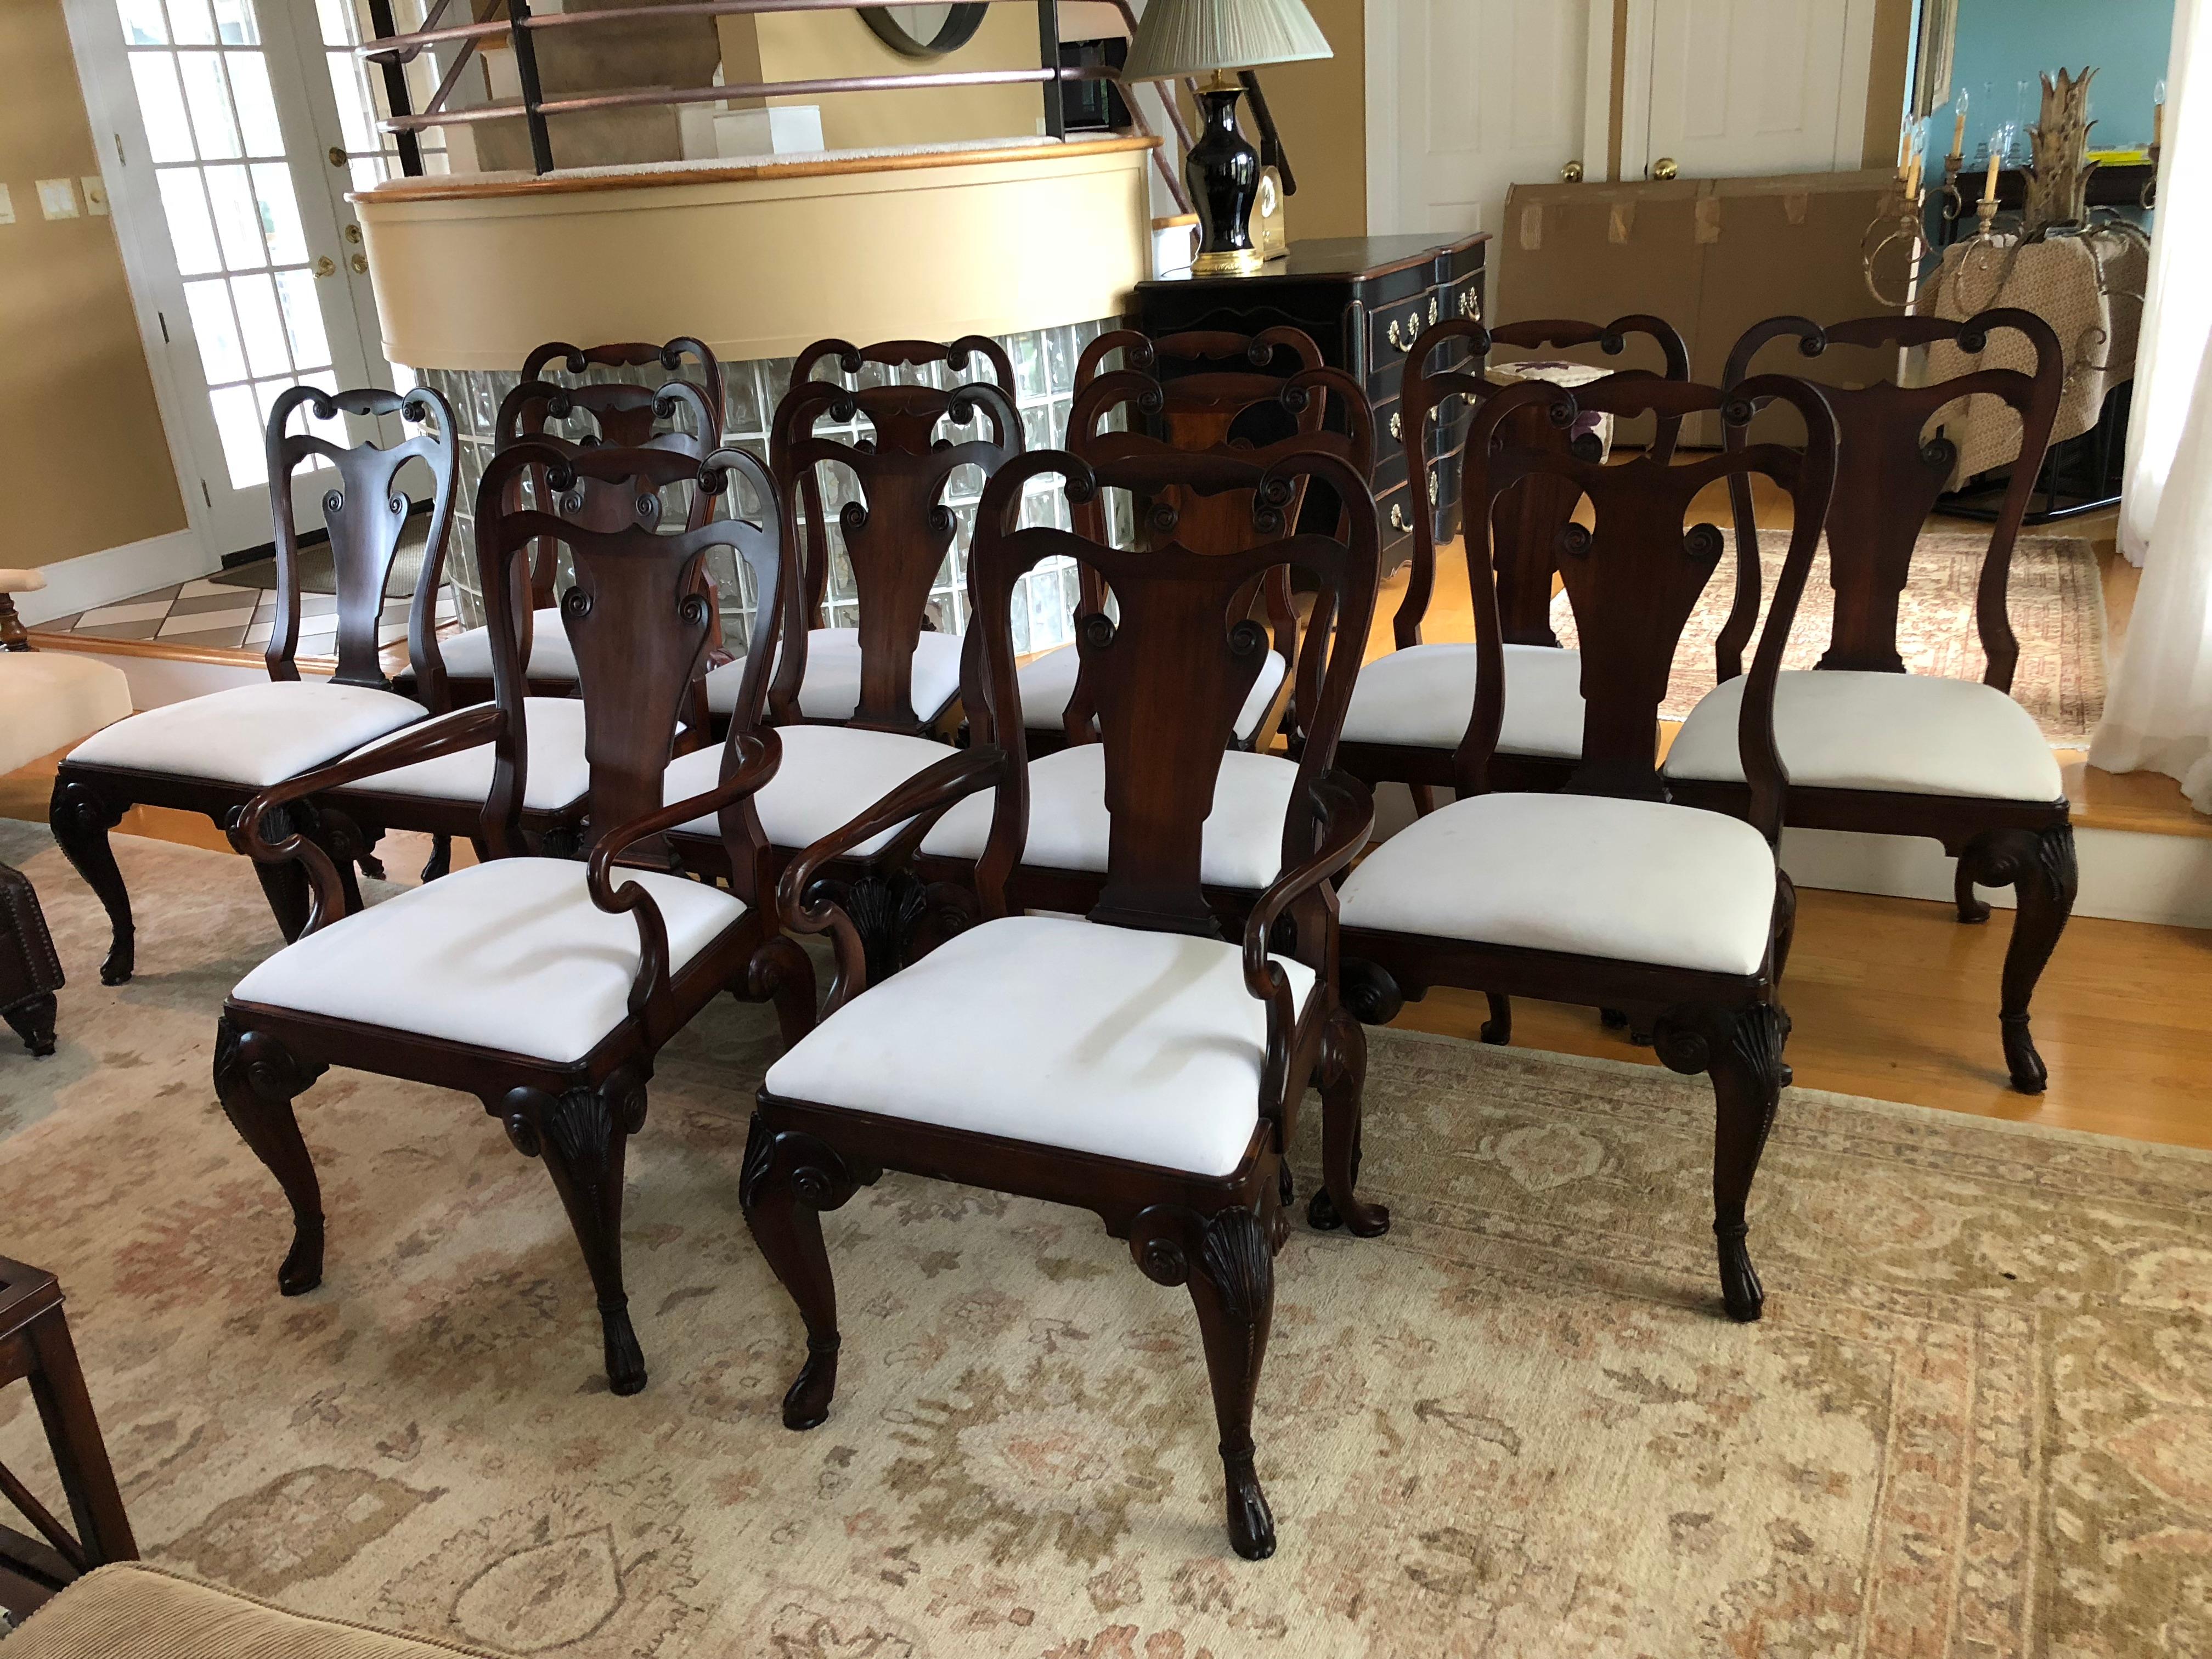 Set of 12 rich mahogany Ralph Lauren for Henredon Beekman dining chairs that includes 2 arm chairs and 10 side chairs. Timeless, Classic style and very comfortable.
Seat padding is fully intact and in great condition except for some age appropriate